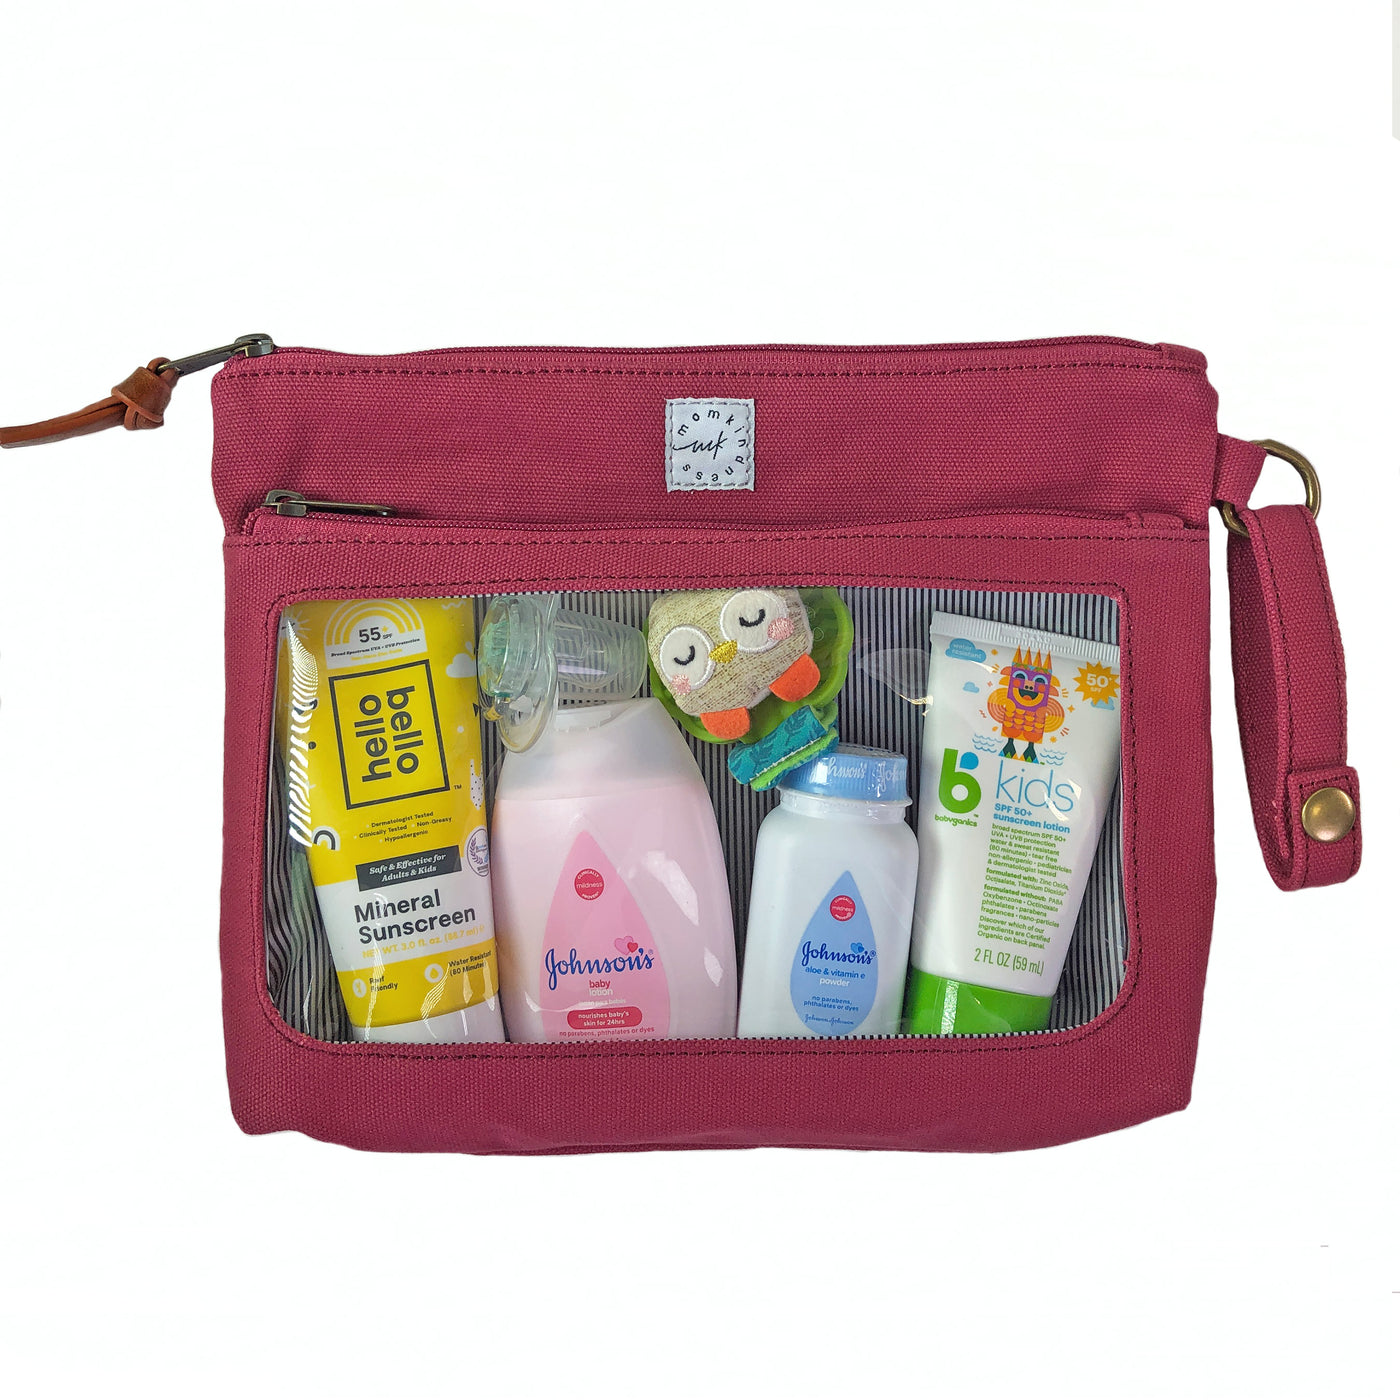 A berry colored canvas pouch with 2 zip-close compartments, a clear view window showing baby care items and a wristlet strap, on a white background.